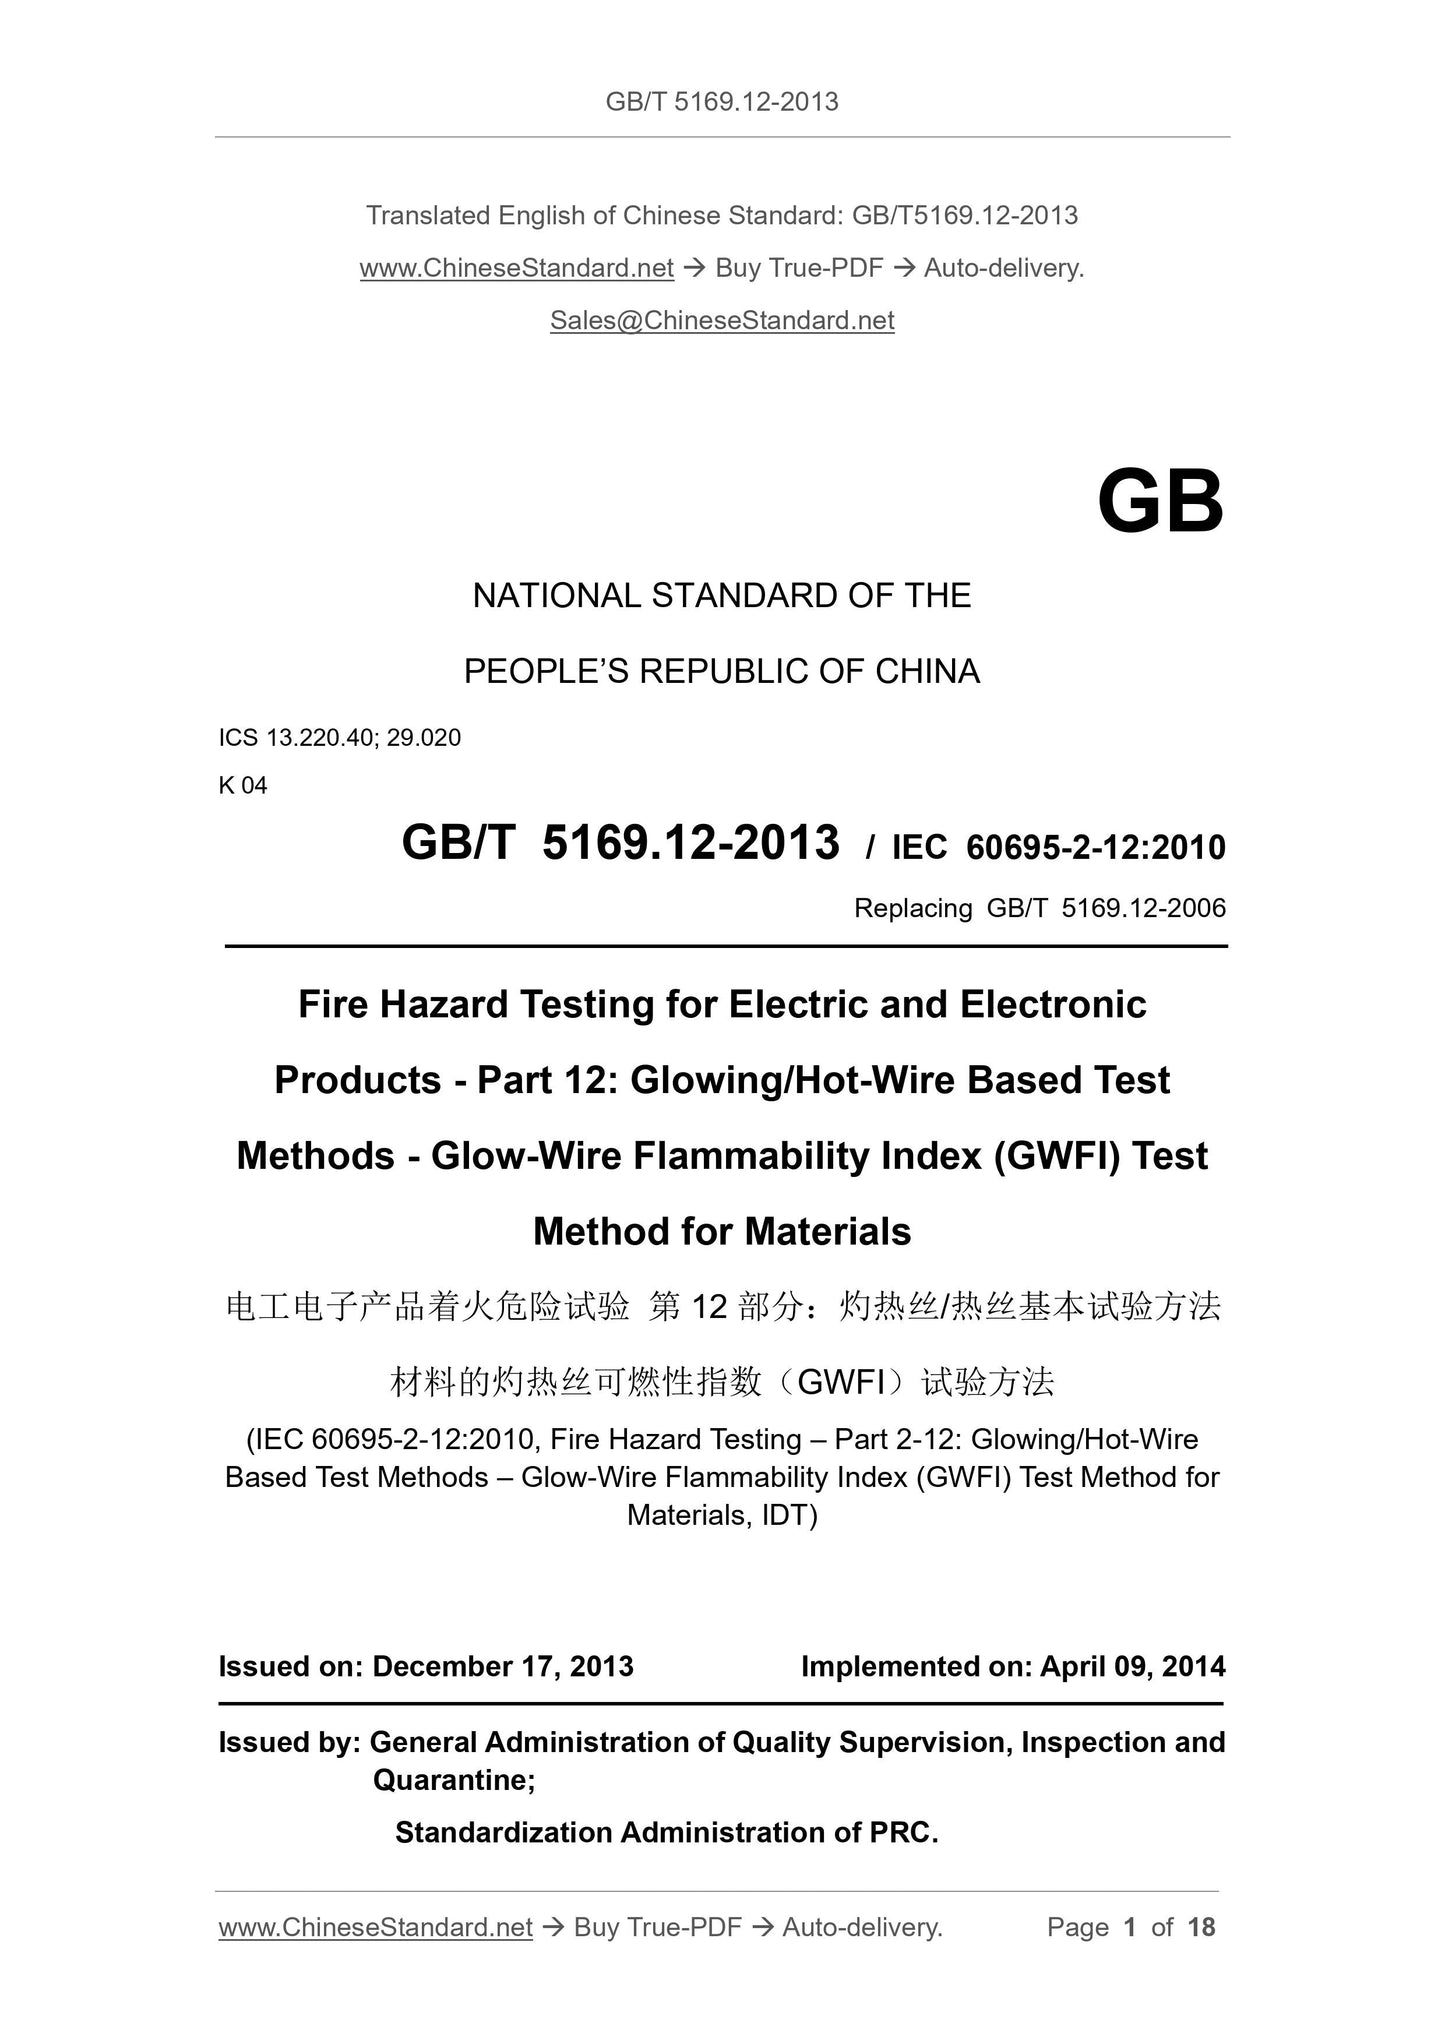 GB/T 5169.12-2013 Page 1